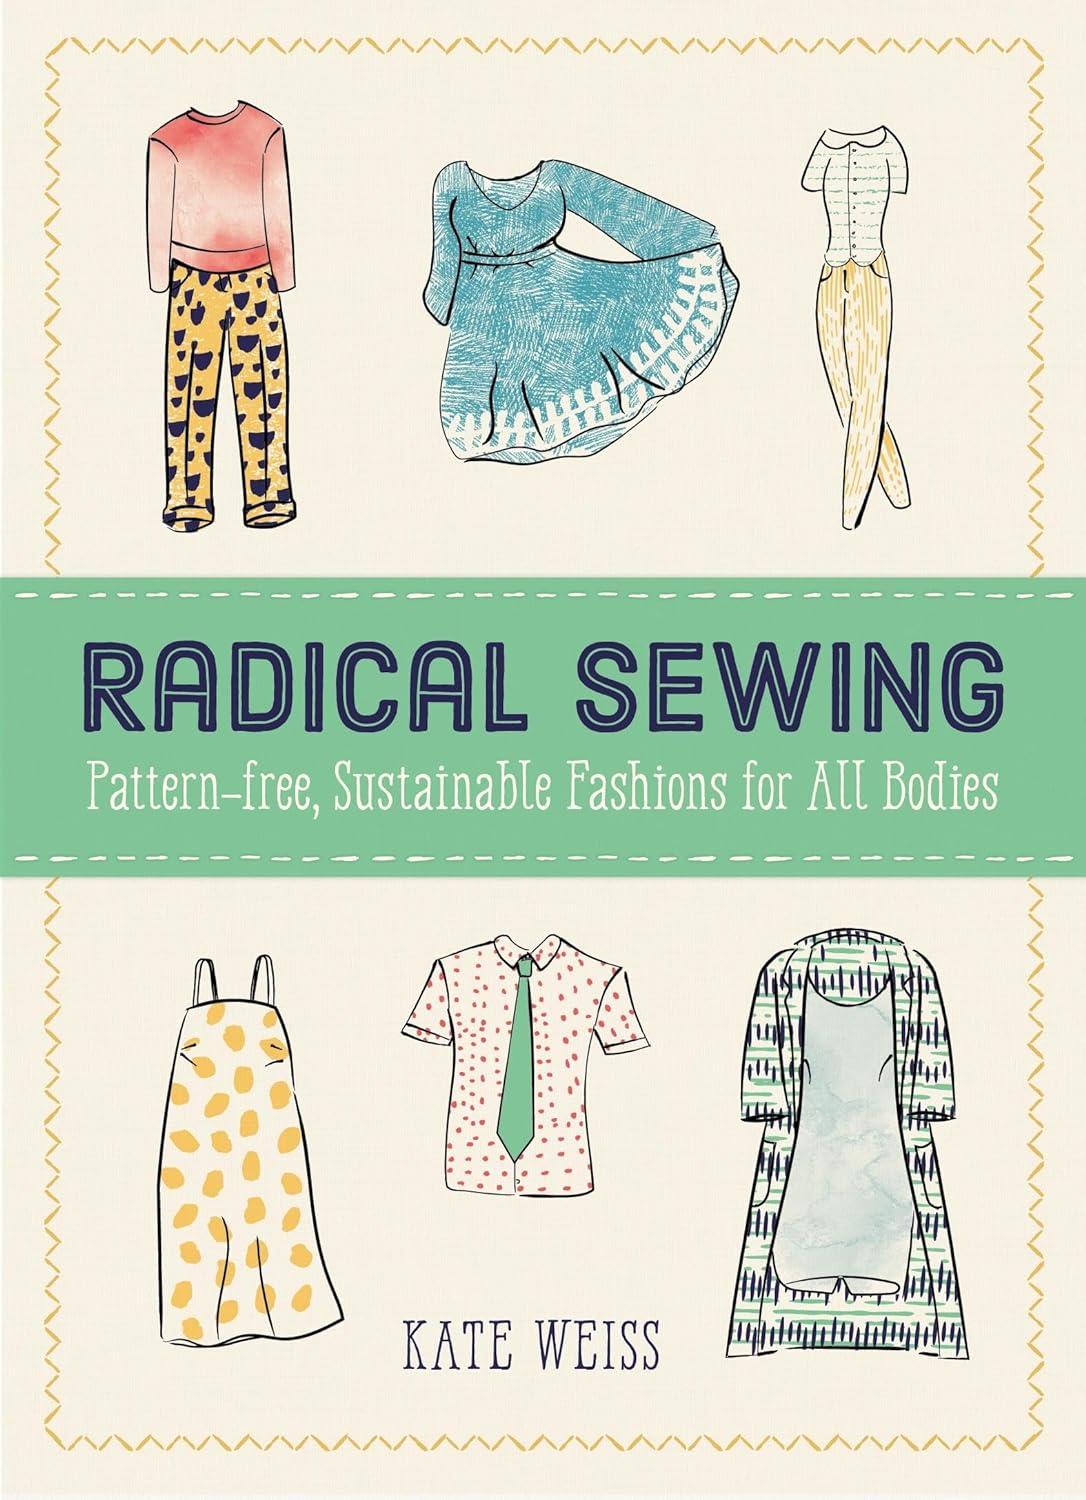 Radical Sewing: Pattern-free, Sustainable Fashions For All Bodies by Kate Weiss